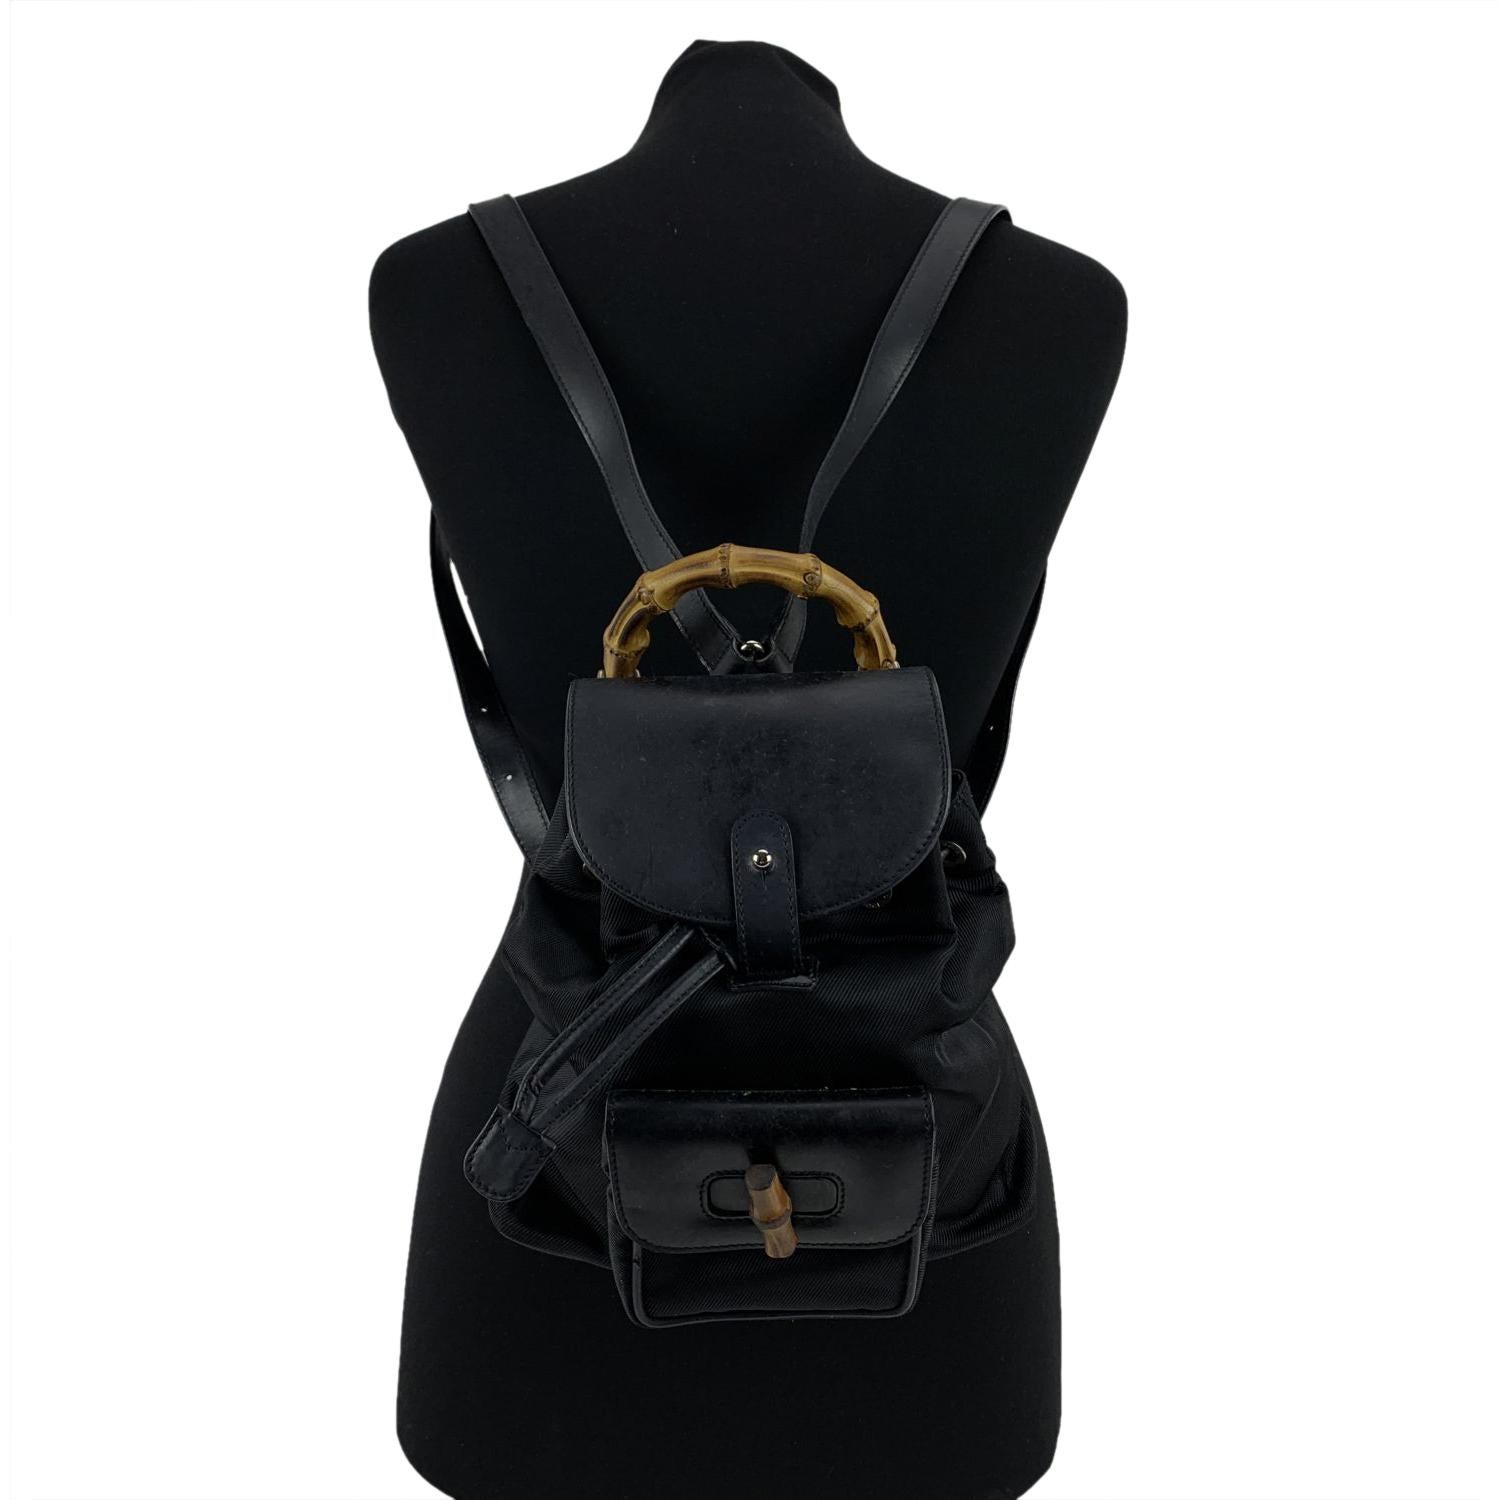 Vintage small backpack by Gucci, crafted in black canvas and leather. It features Bamboo handle and and knob. 1 front pocket with twist lock closure. Flap closure and drawstring top opening. gold metal hardware. Internal diamond lining. 1 side zip